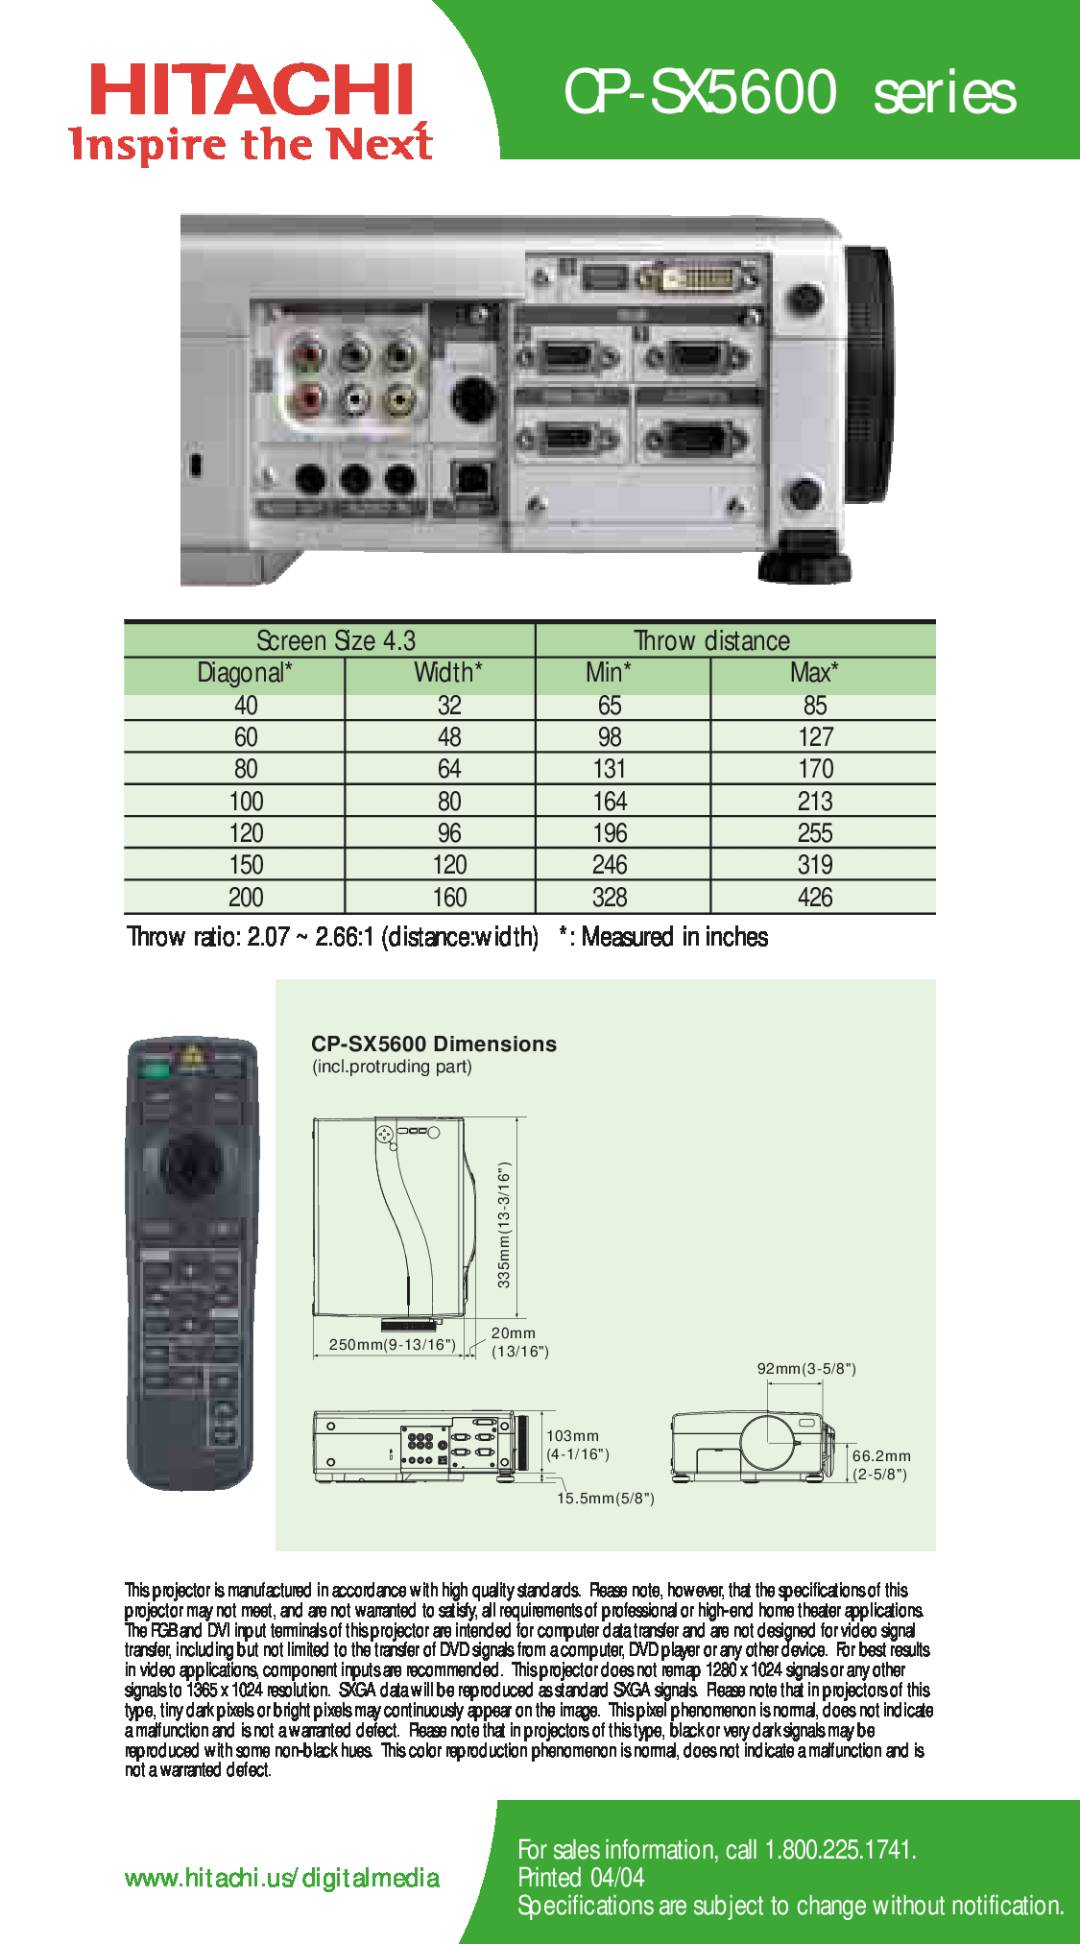 Hitachi CP-SX5600 series, Screen Size, Throw distance, Diagonal, Width, Measured in inches, For sales information, call 